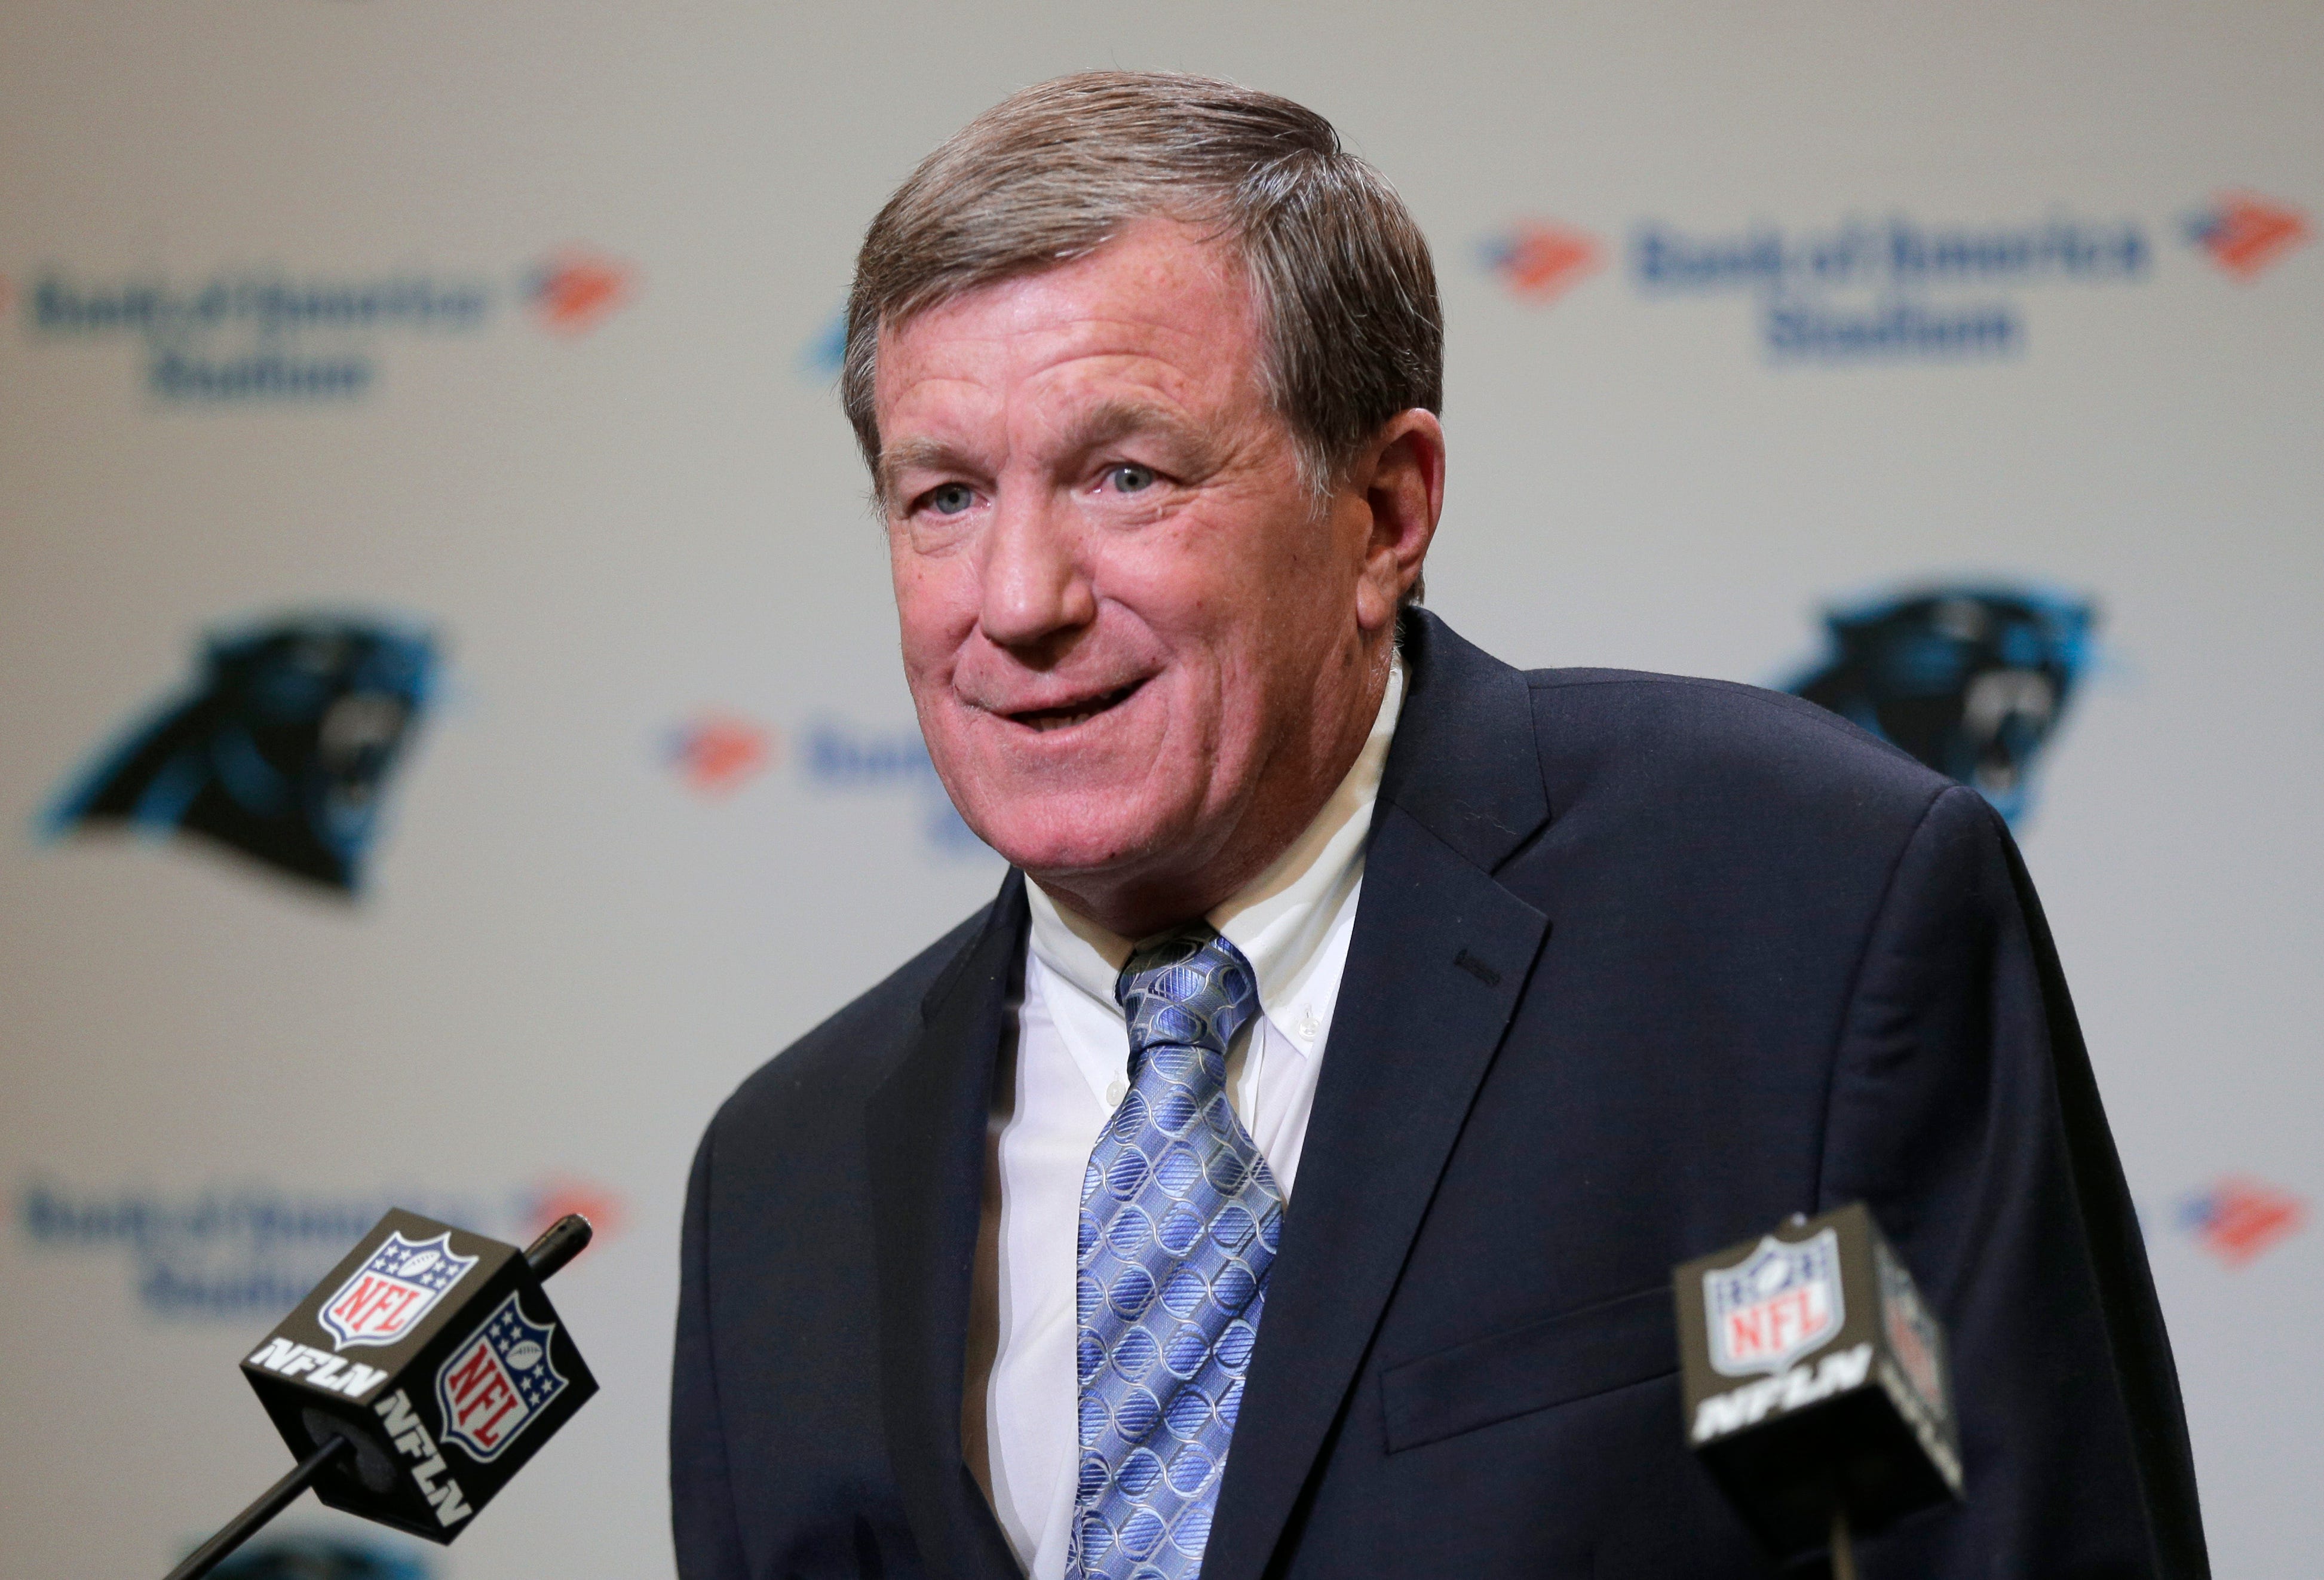 Marty Hurney reinstated as Panthers interim GM after league investigation